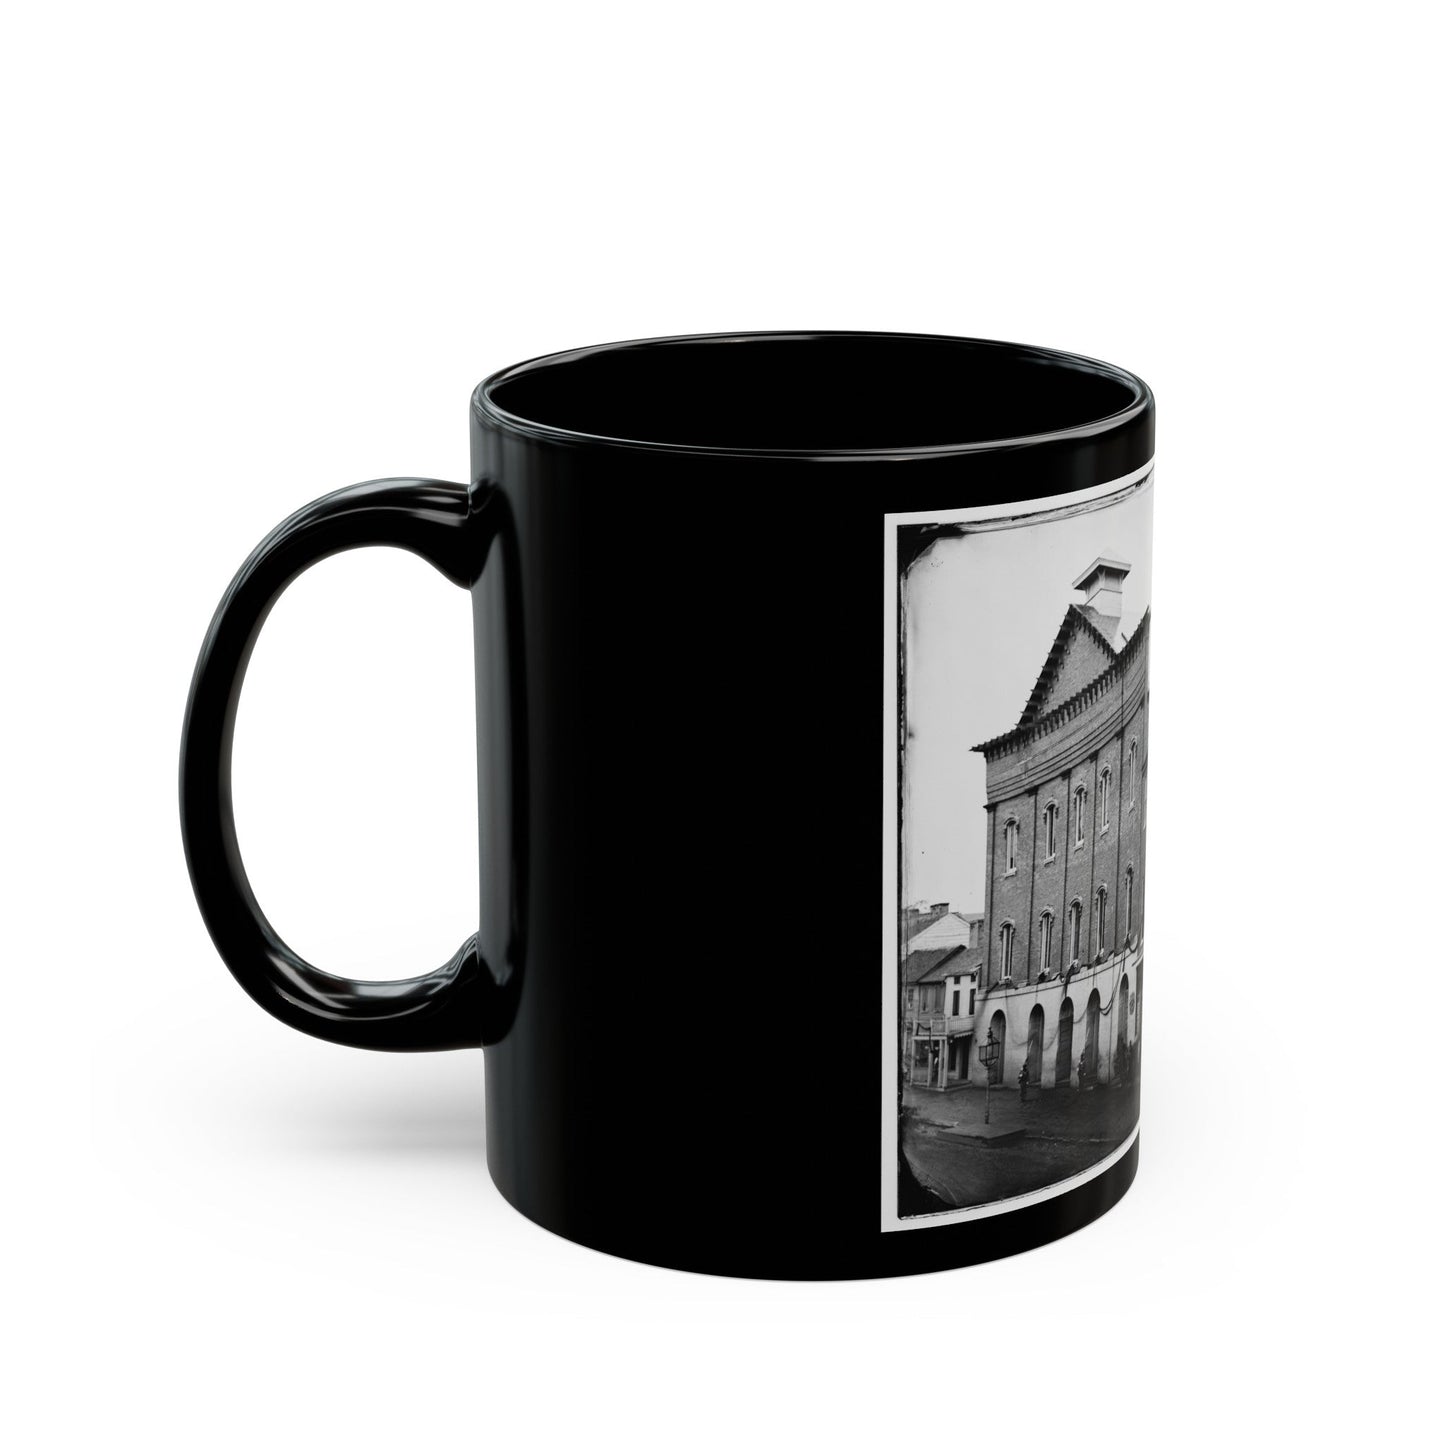 Washington, D.C. Ford's Theater With Guards Posted At Entrance And Crepe Draped From Windows (U.S. Civil War) Black Coffee Mug